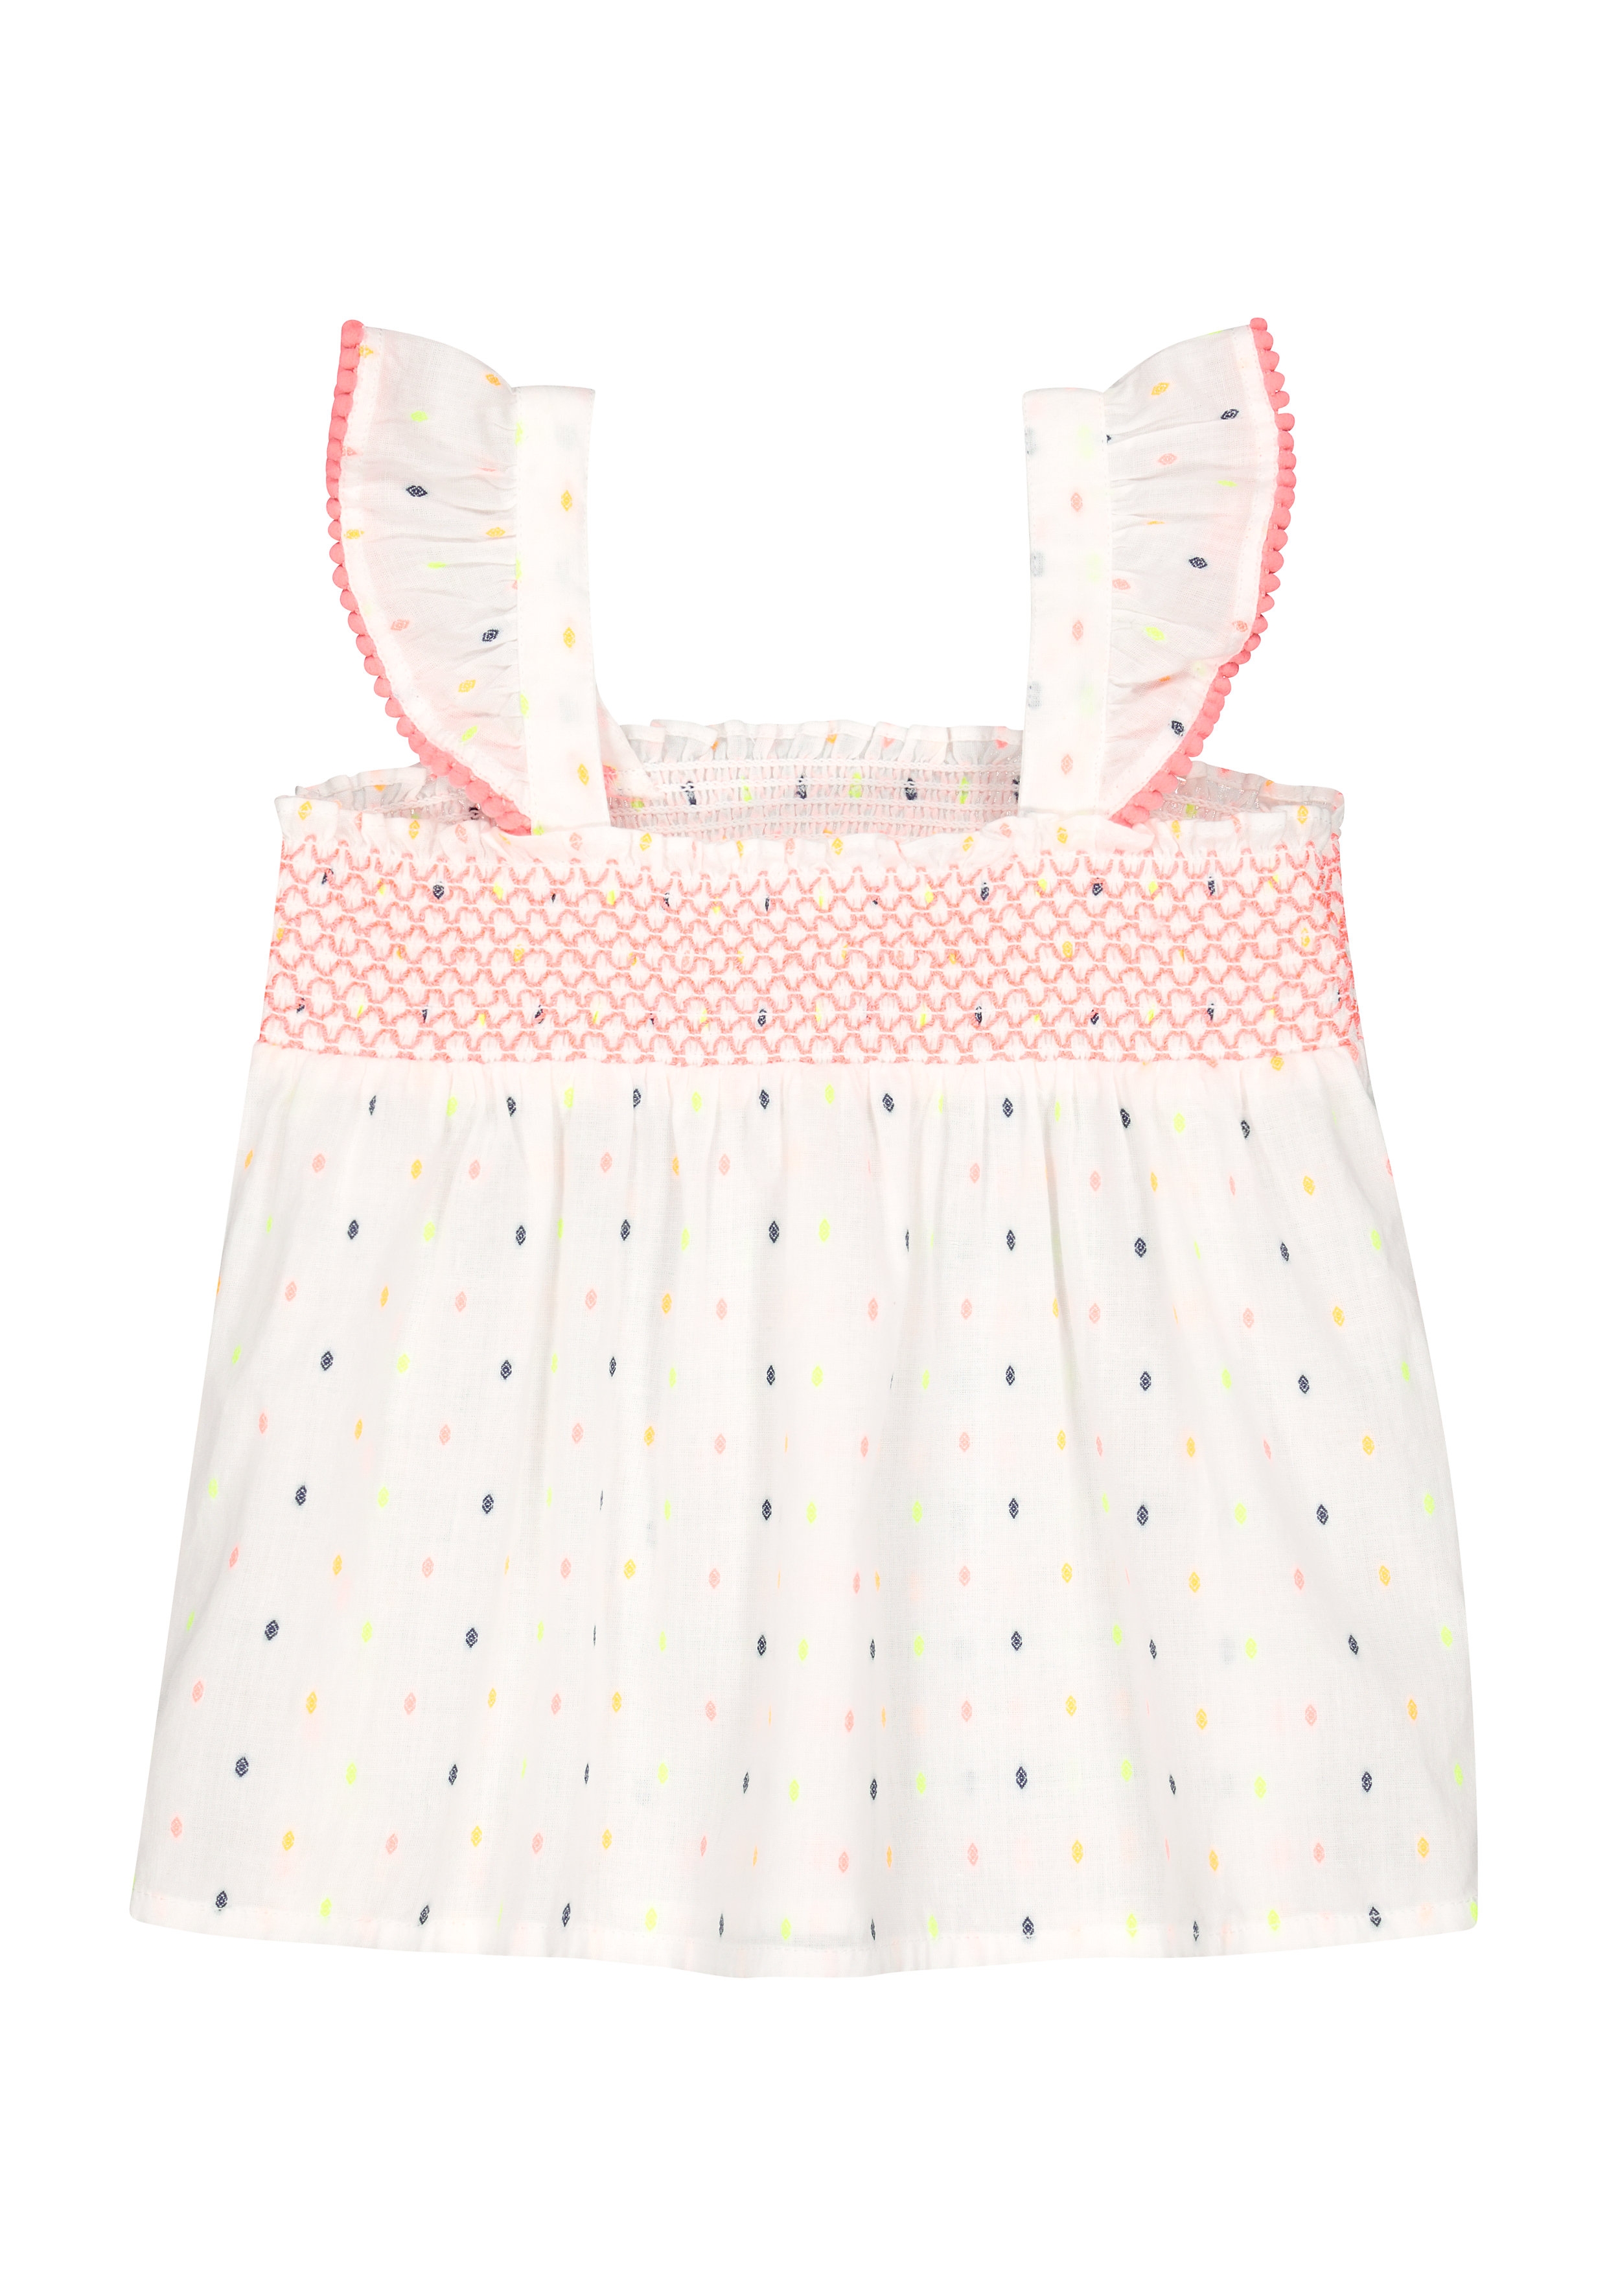 Mothercare | Girls Sleeveless Lace Details Top - White 1